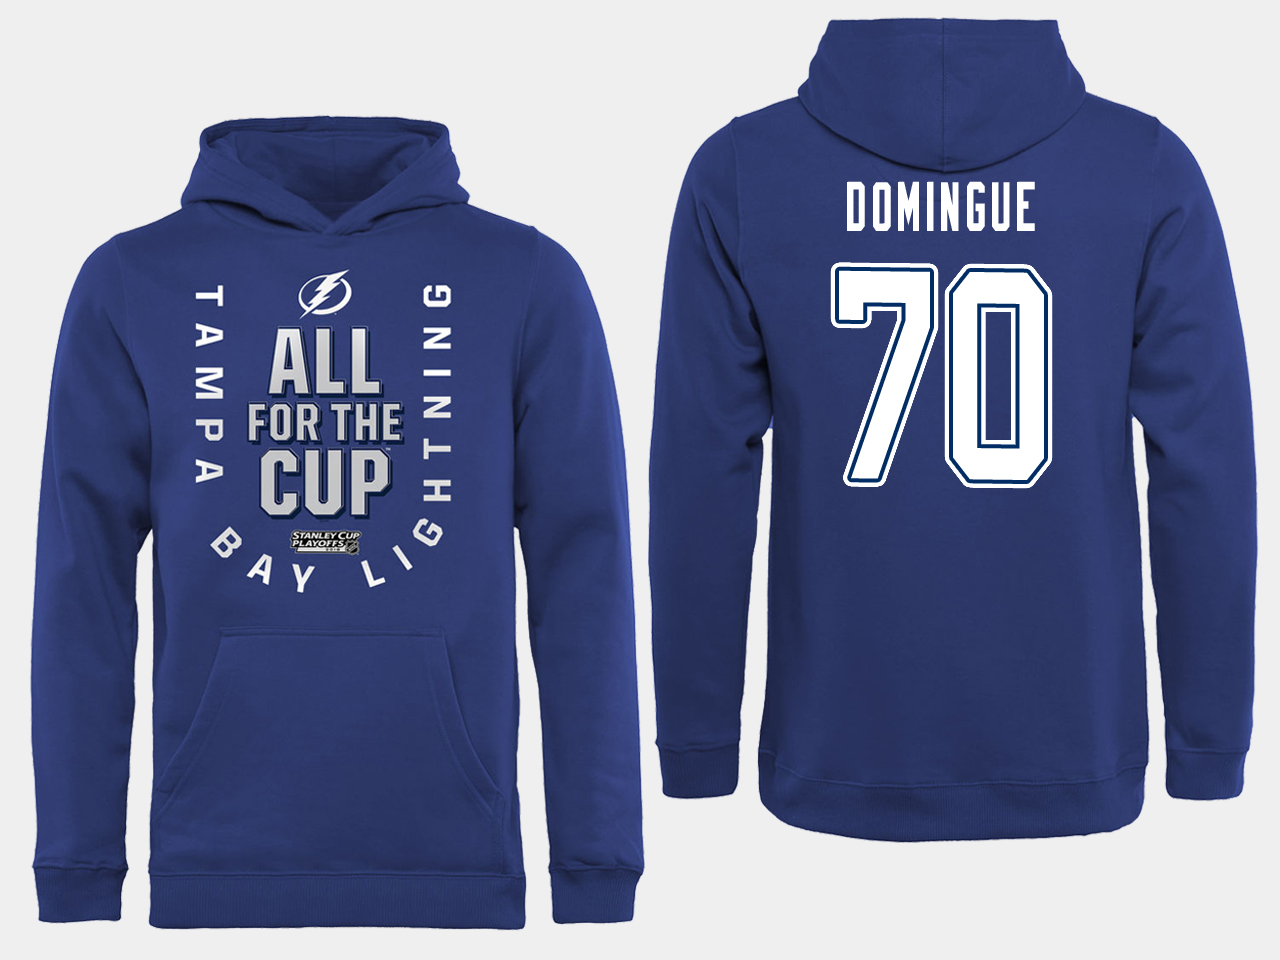 NHL Men adidas Tampa Bay Lightning #70 Domingue blue All for the Cup Hoodie->tampa bay lightning->NHL Jersey